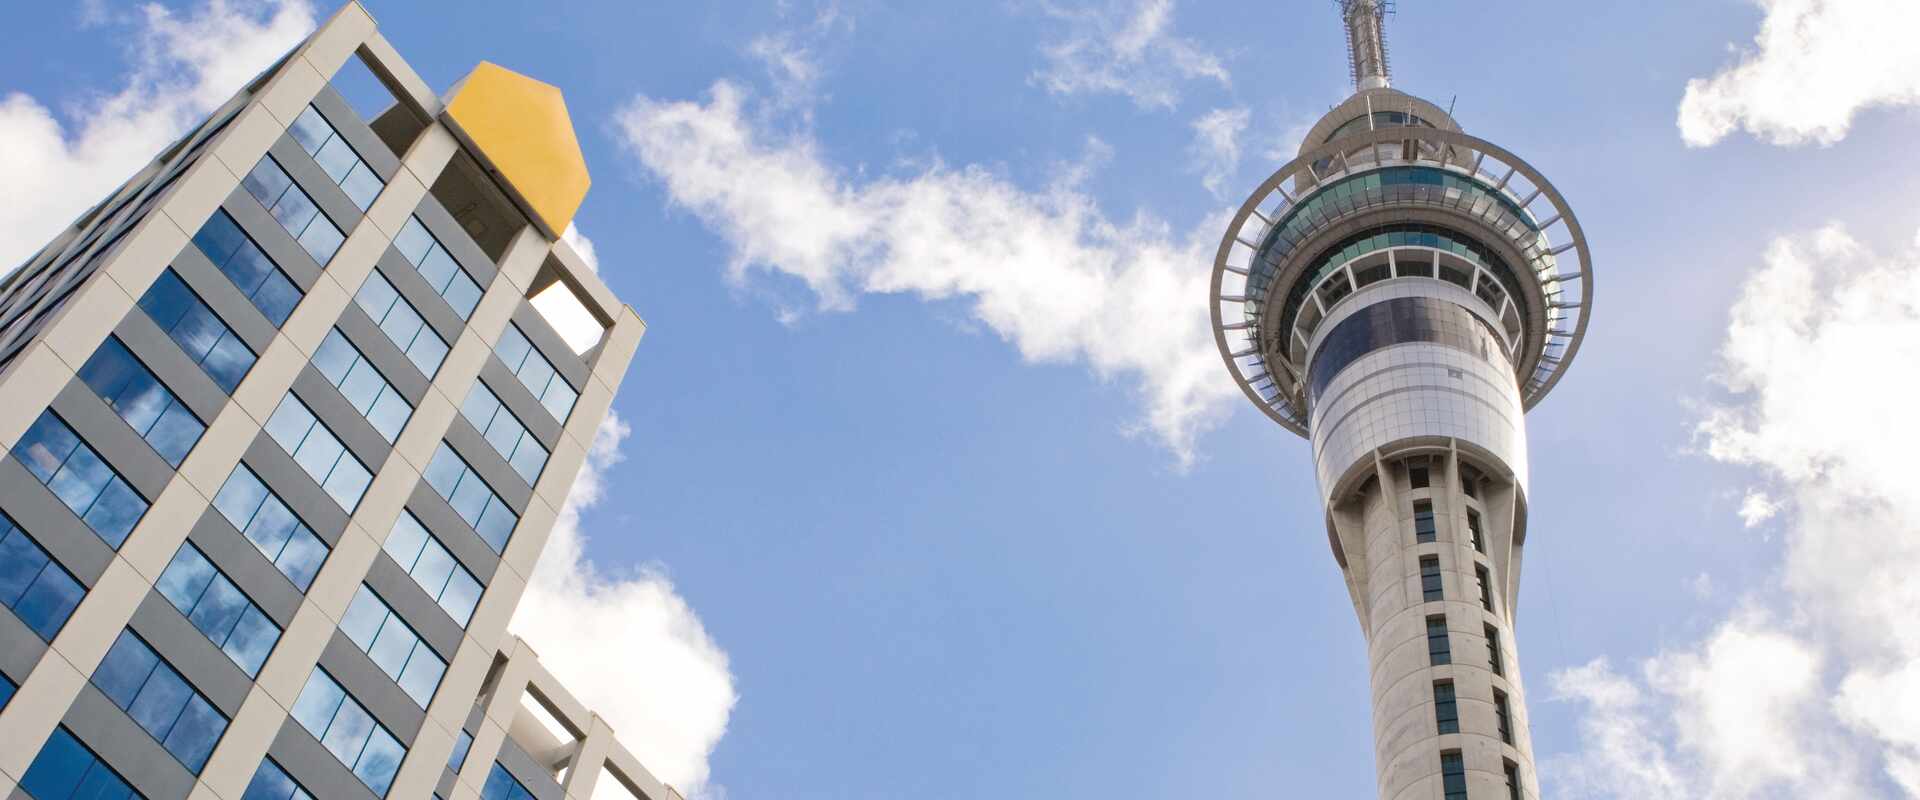 Auckland sky tower north island new zealand